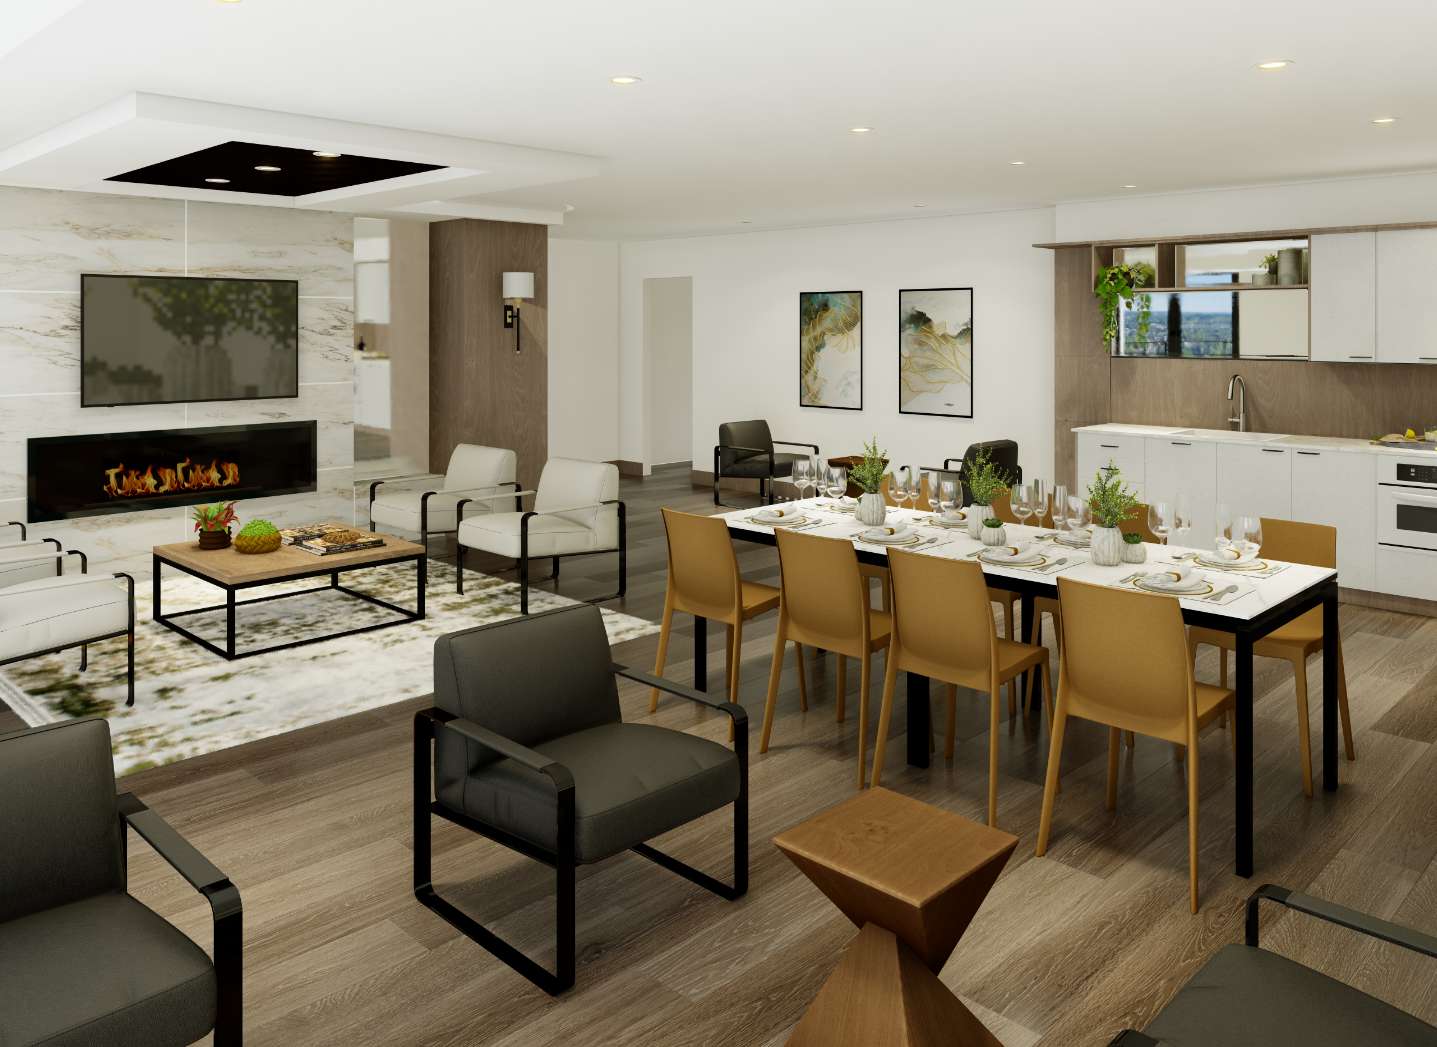 A rendering of the modern amenity room at the Winston. There is a fireplace, multiple lounge areas, and kitchen with dining table.